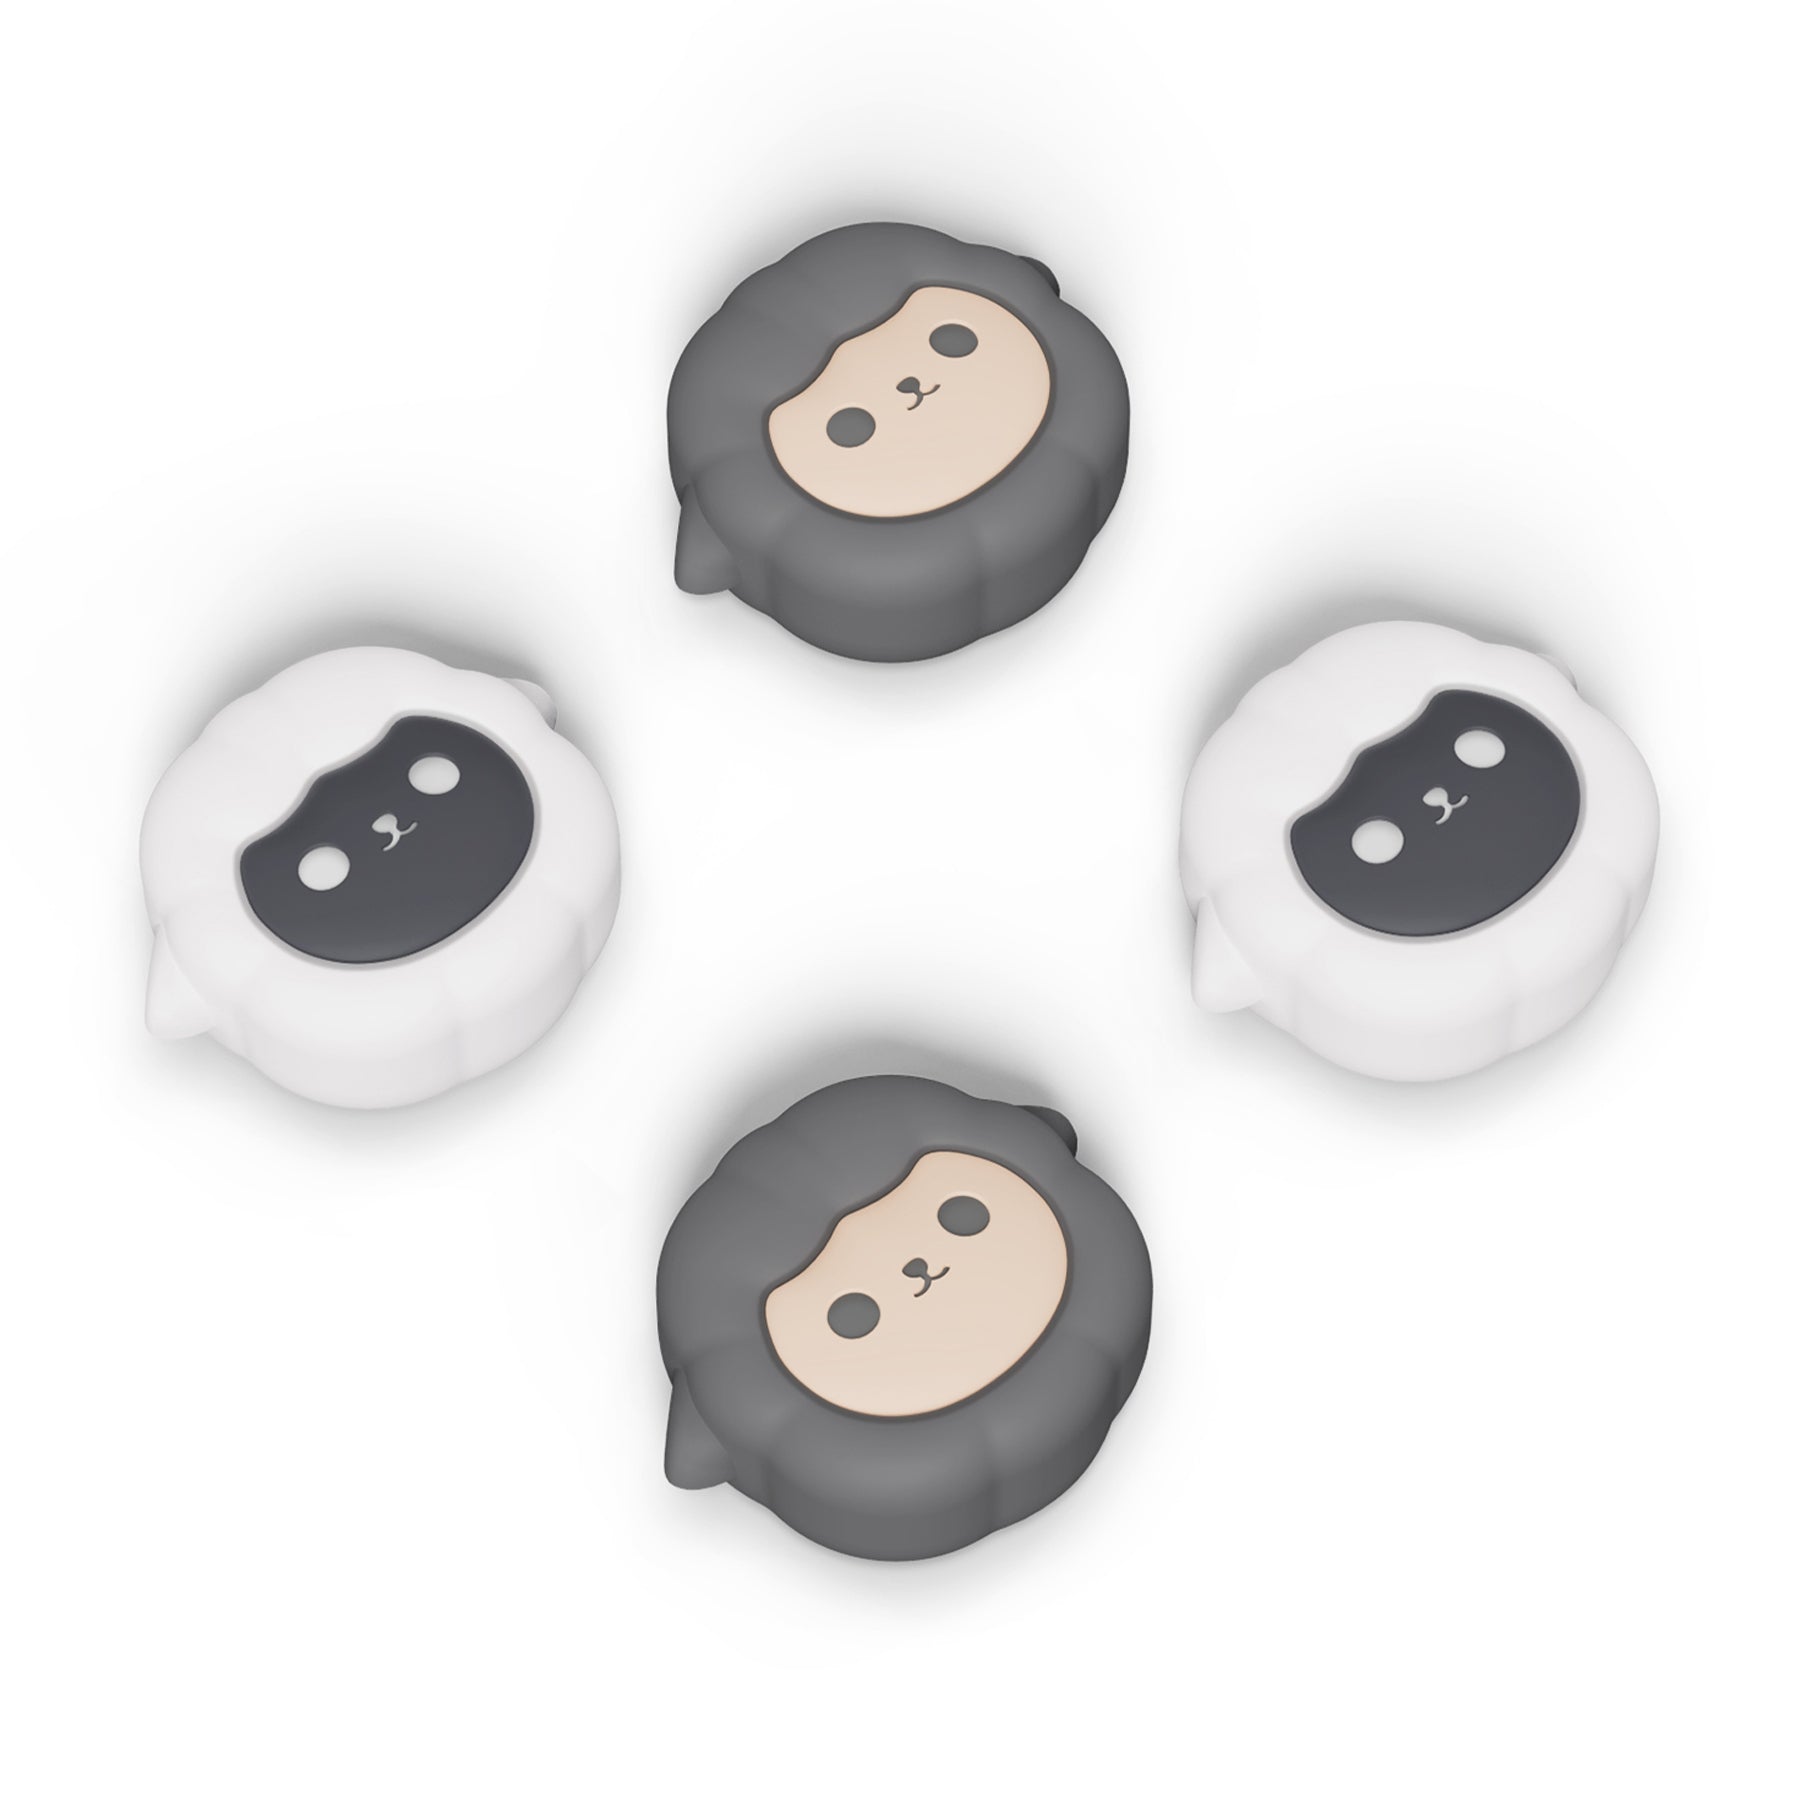 PlayVital Joystick Caps for NS Switch, Thumbstick Caps for NS Switch Lite, Analog Cover for NS Switch OLED Joycon Thumb Grip Caps for NS Switch & NS Switch Lite & NS Switch OLED - Little Sheep - NJM1172 playvital